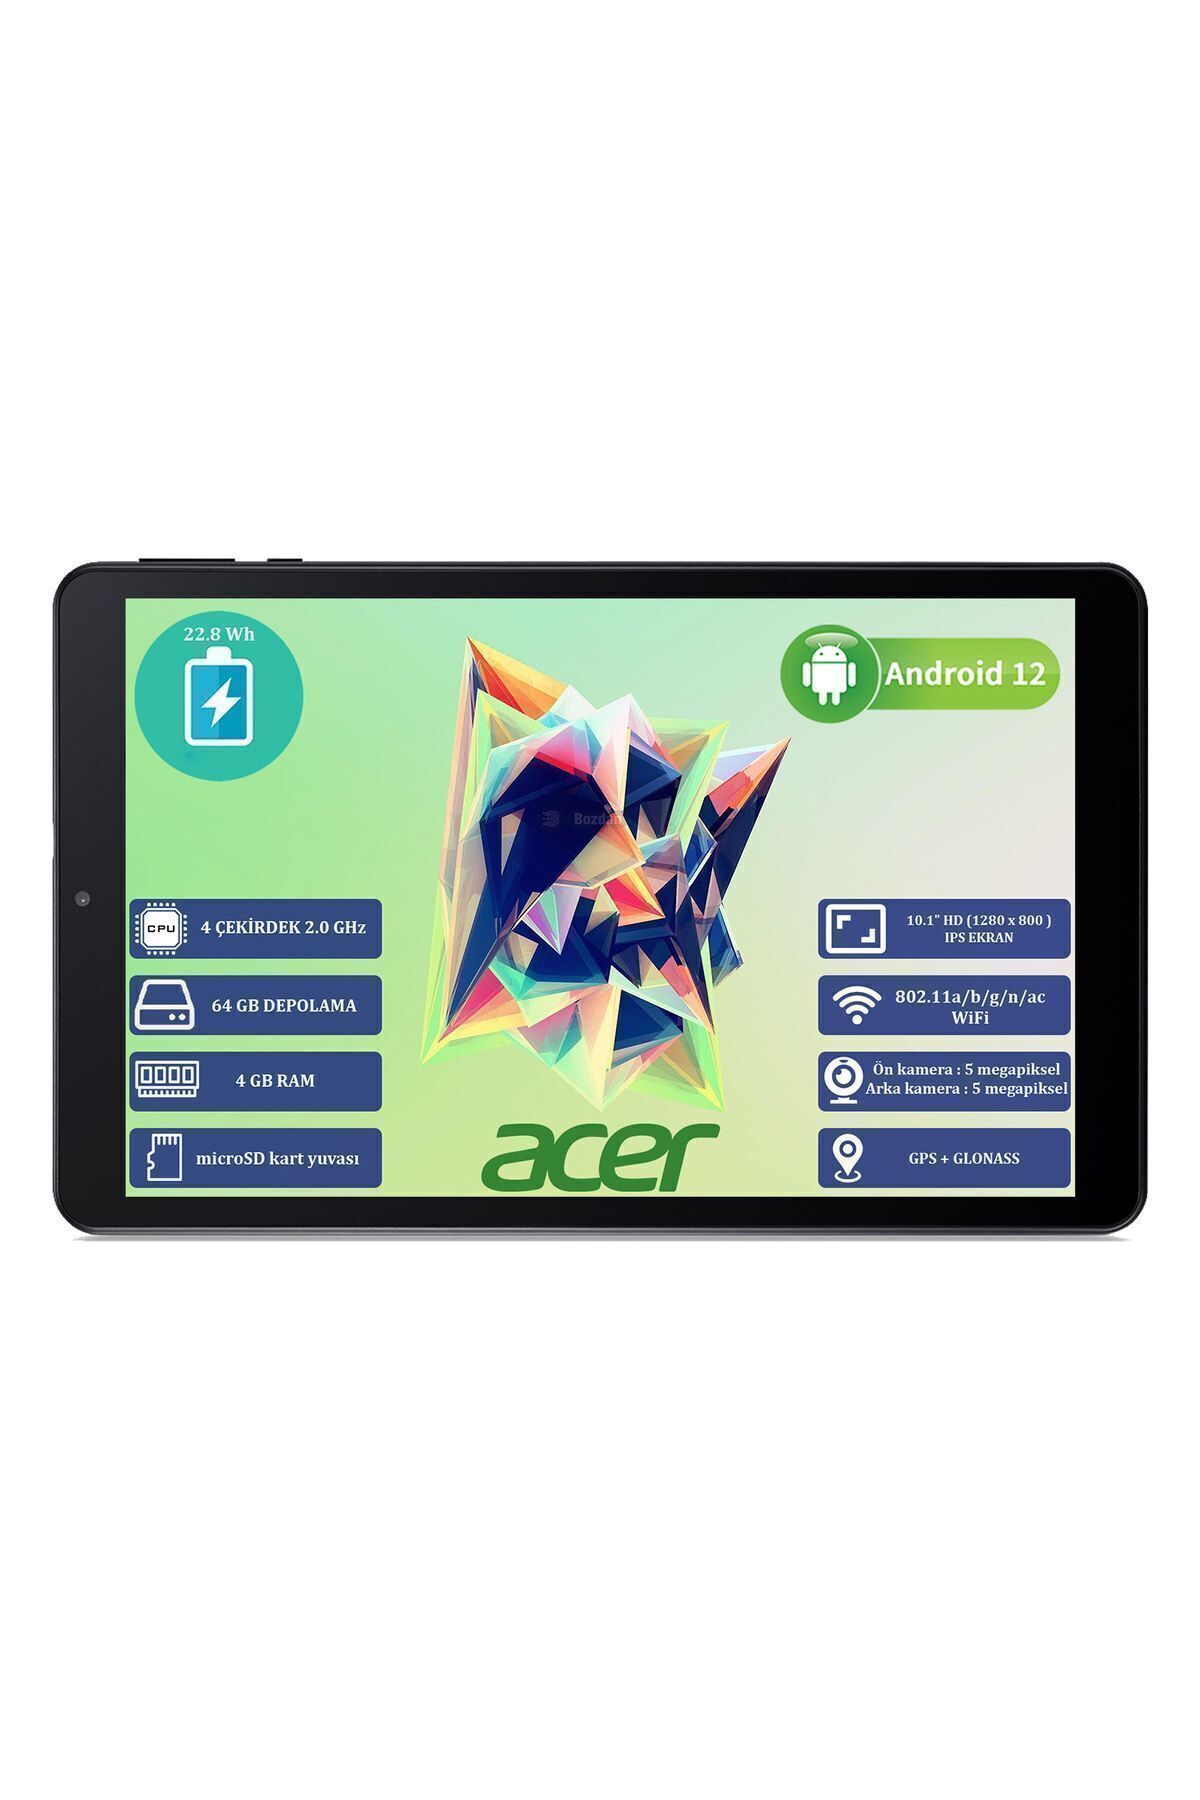 ACER Iconia A10 4 GB Ram 64 GB SSD 10.1" HD (1280 x 800 ) IPS Yeni Nesil Android Tablet NT.LG0EY.001